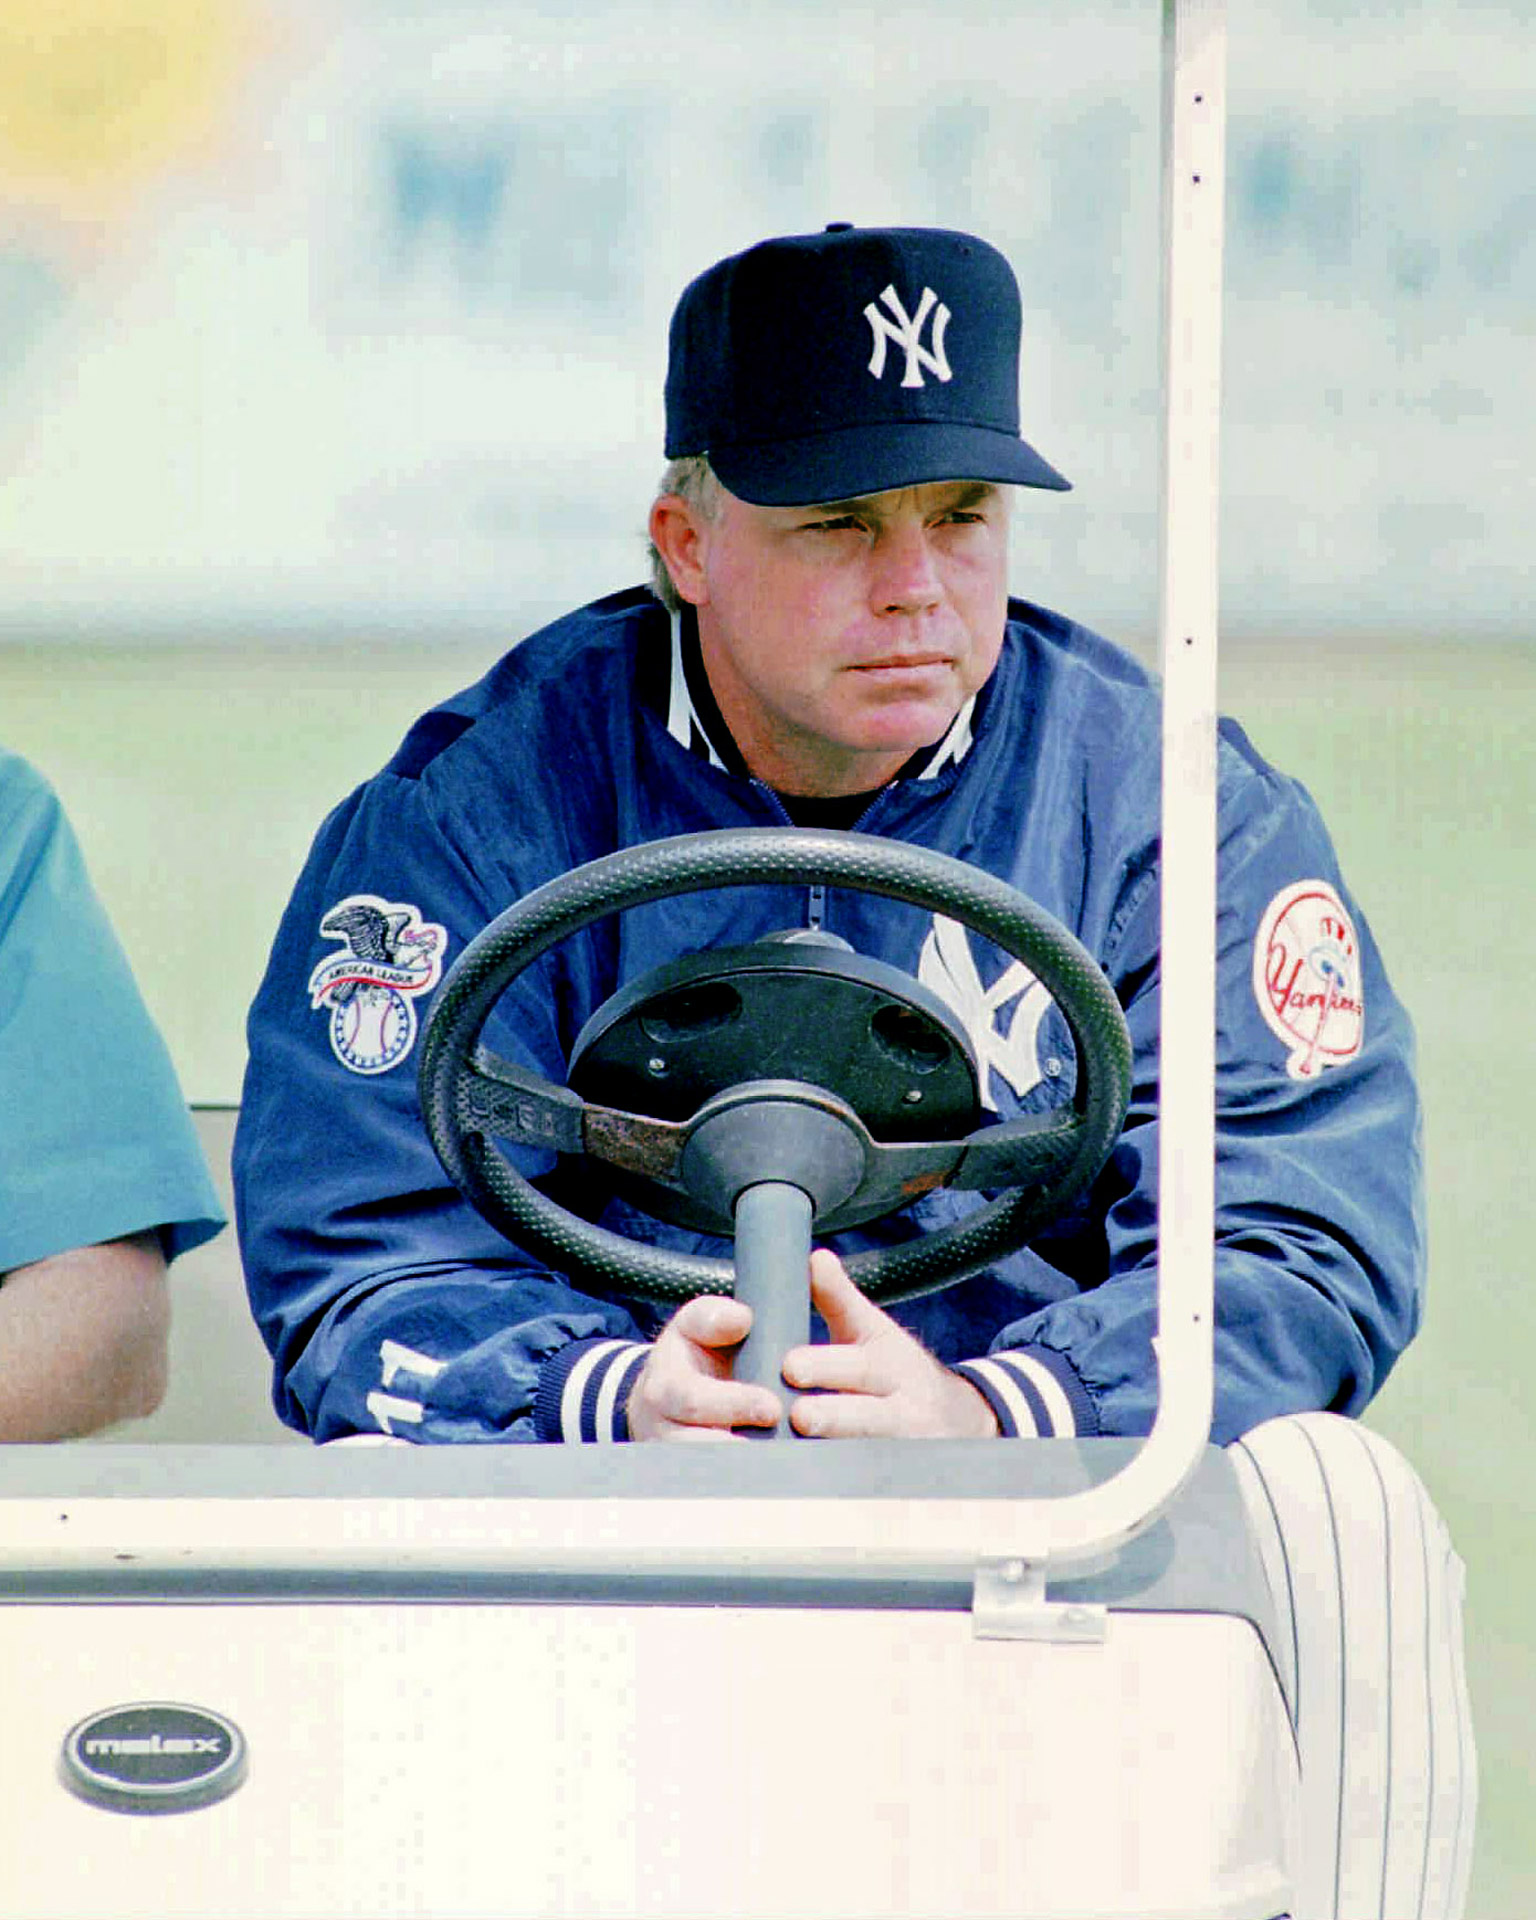 Buck Showalter's Formative Days with the 1985 Oneonta Yankees